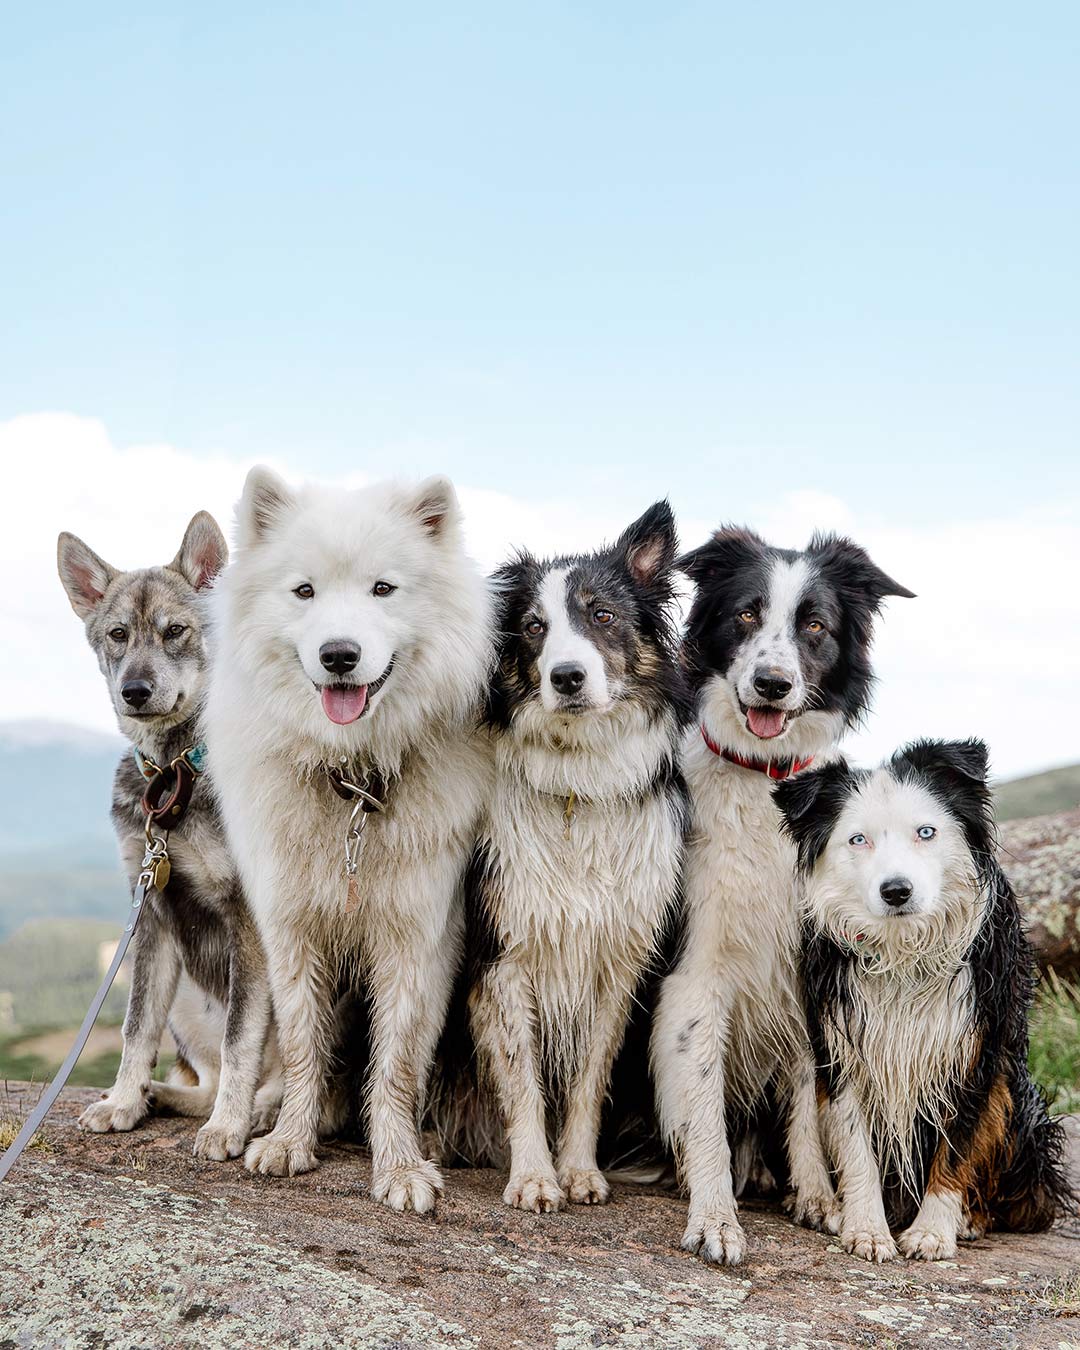 Pack of dogs sitting on a rock during a hike